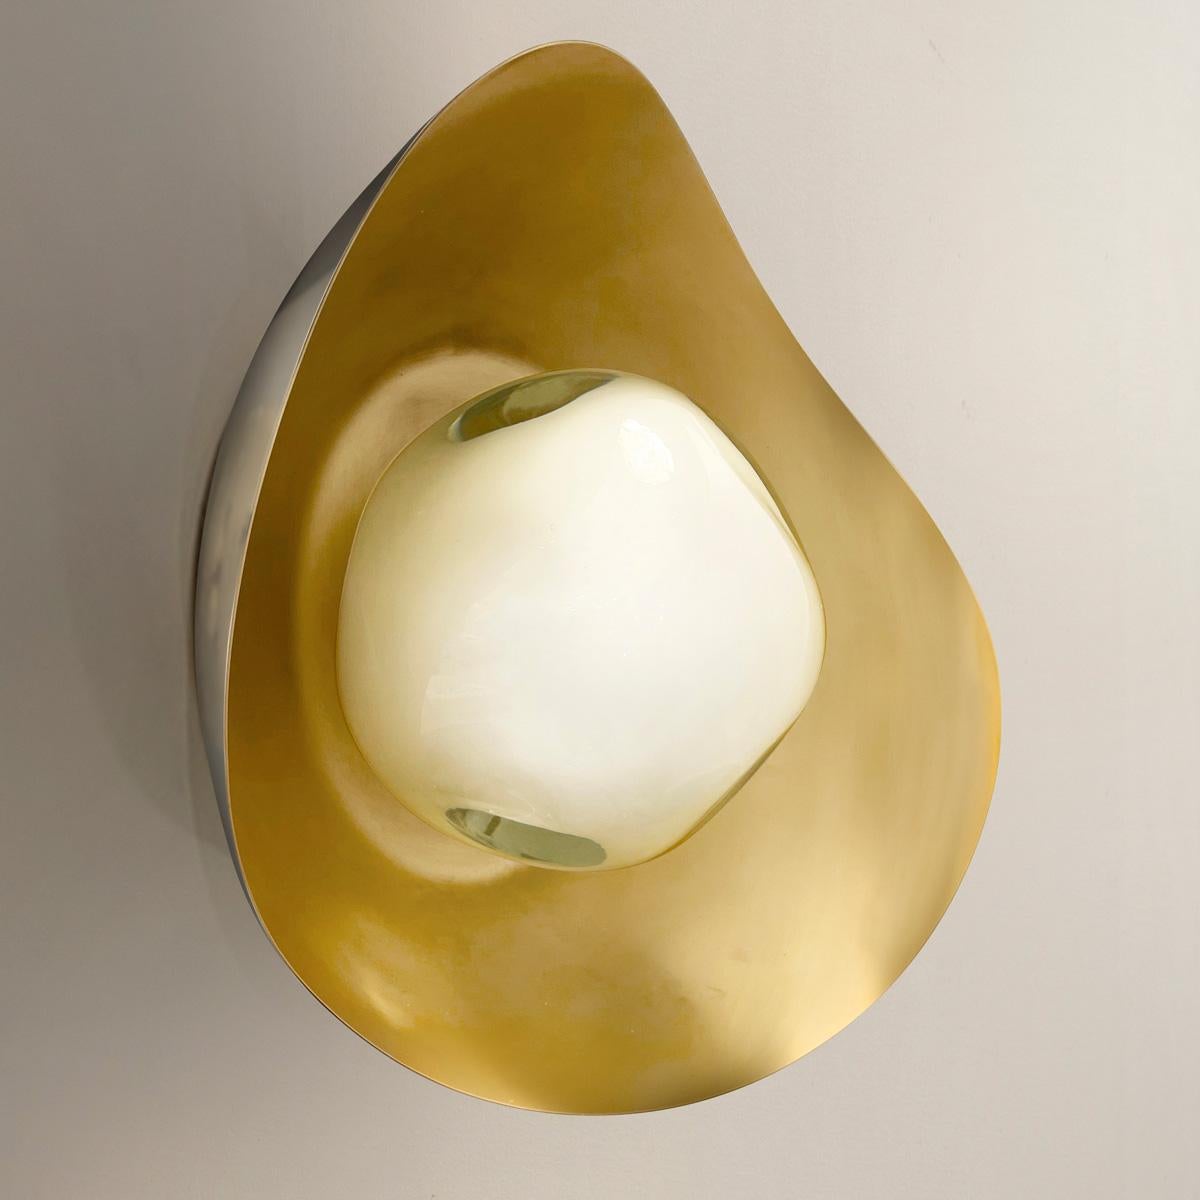 Perla Wall Light by Gaspare Asaro-Satin Brass/Polished Nickel Finish In New Condition For Sale In New York, NY